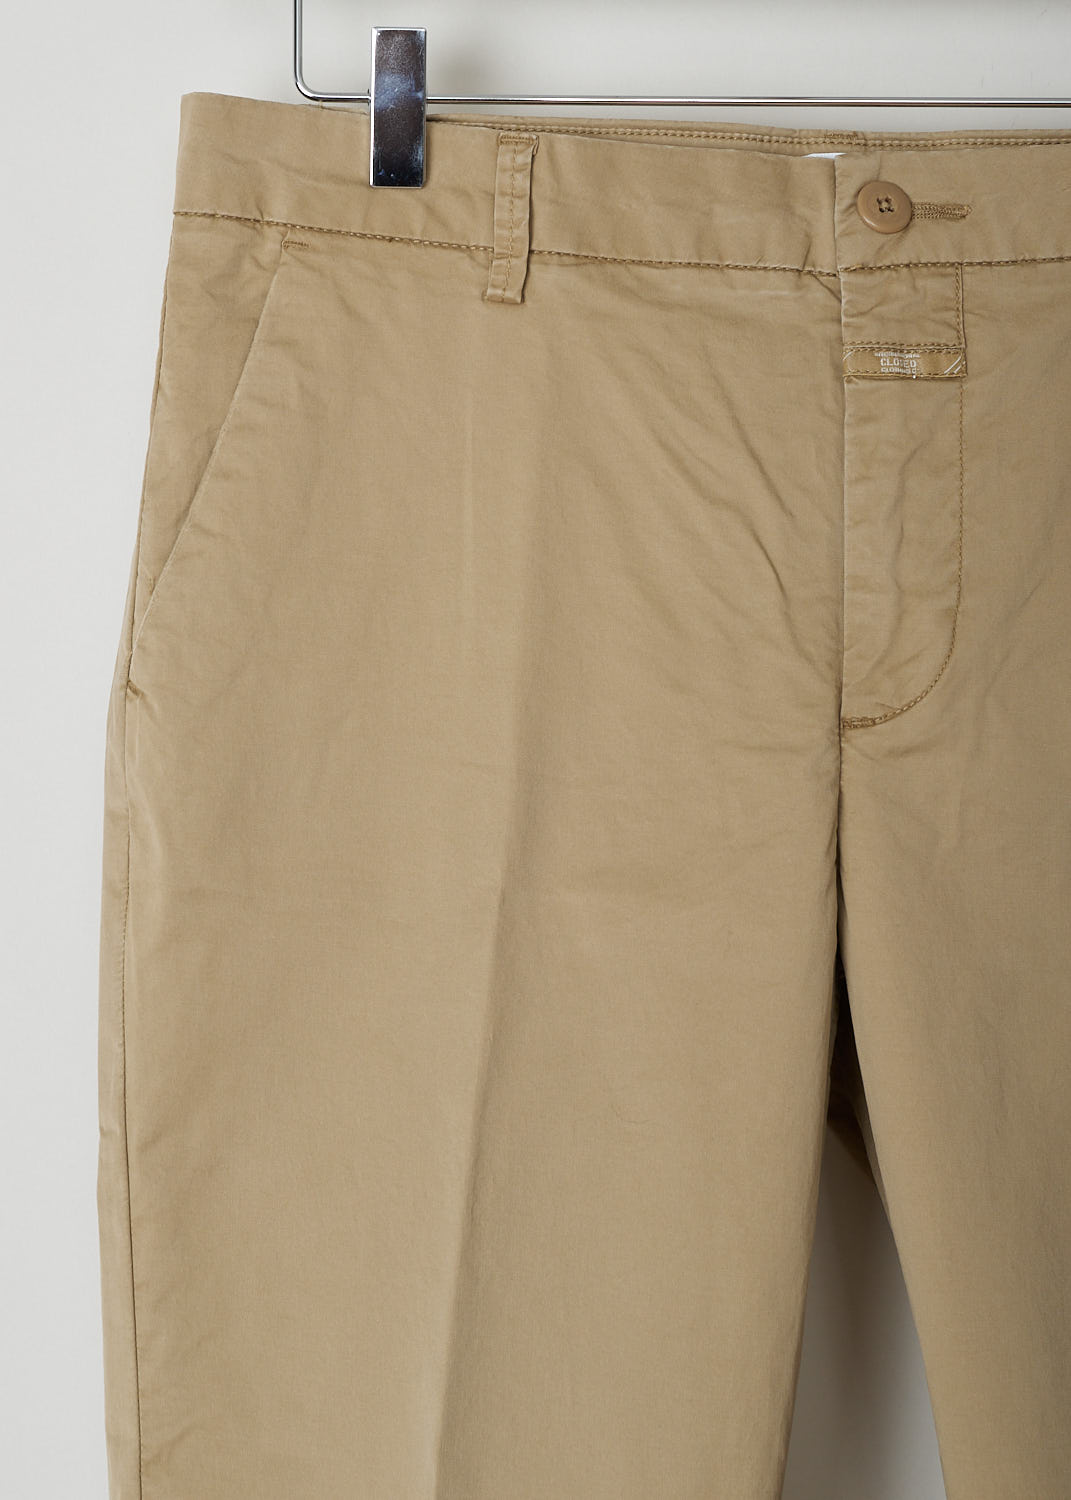 STEWART_C91796_53S_SR_919 CLOSED CLASSIC BEIGE TROUSERS Beige, Detail, These classic trousers in beige feature belt loops and a zipper and button closure. They feature slanted pockets on the front and two buttoned welt pockets on the back. What makes this model stand out the is the broad fold-over hem.
 